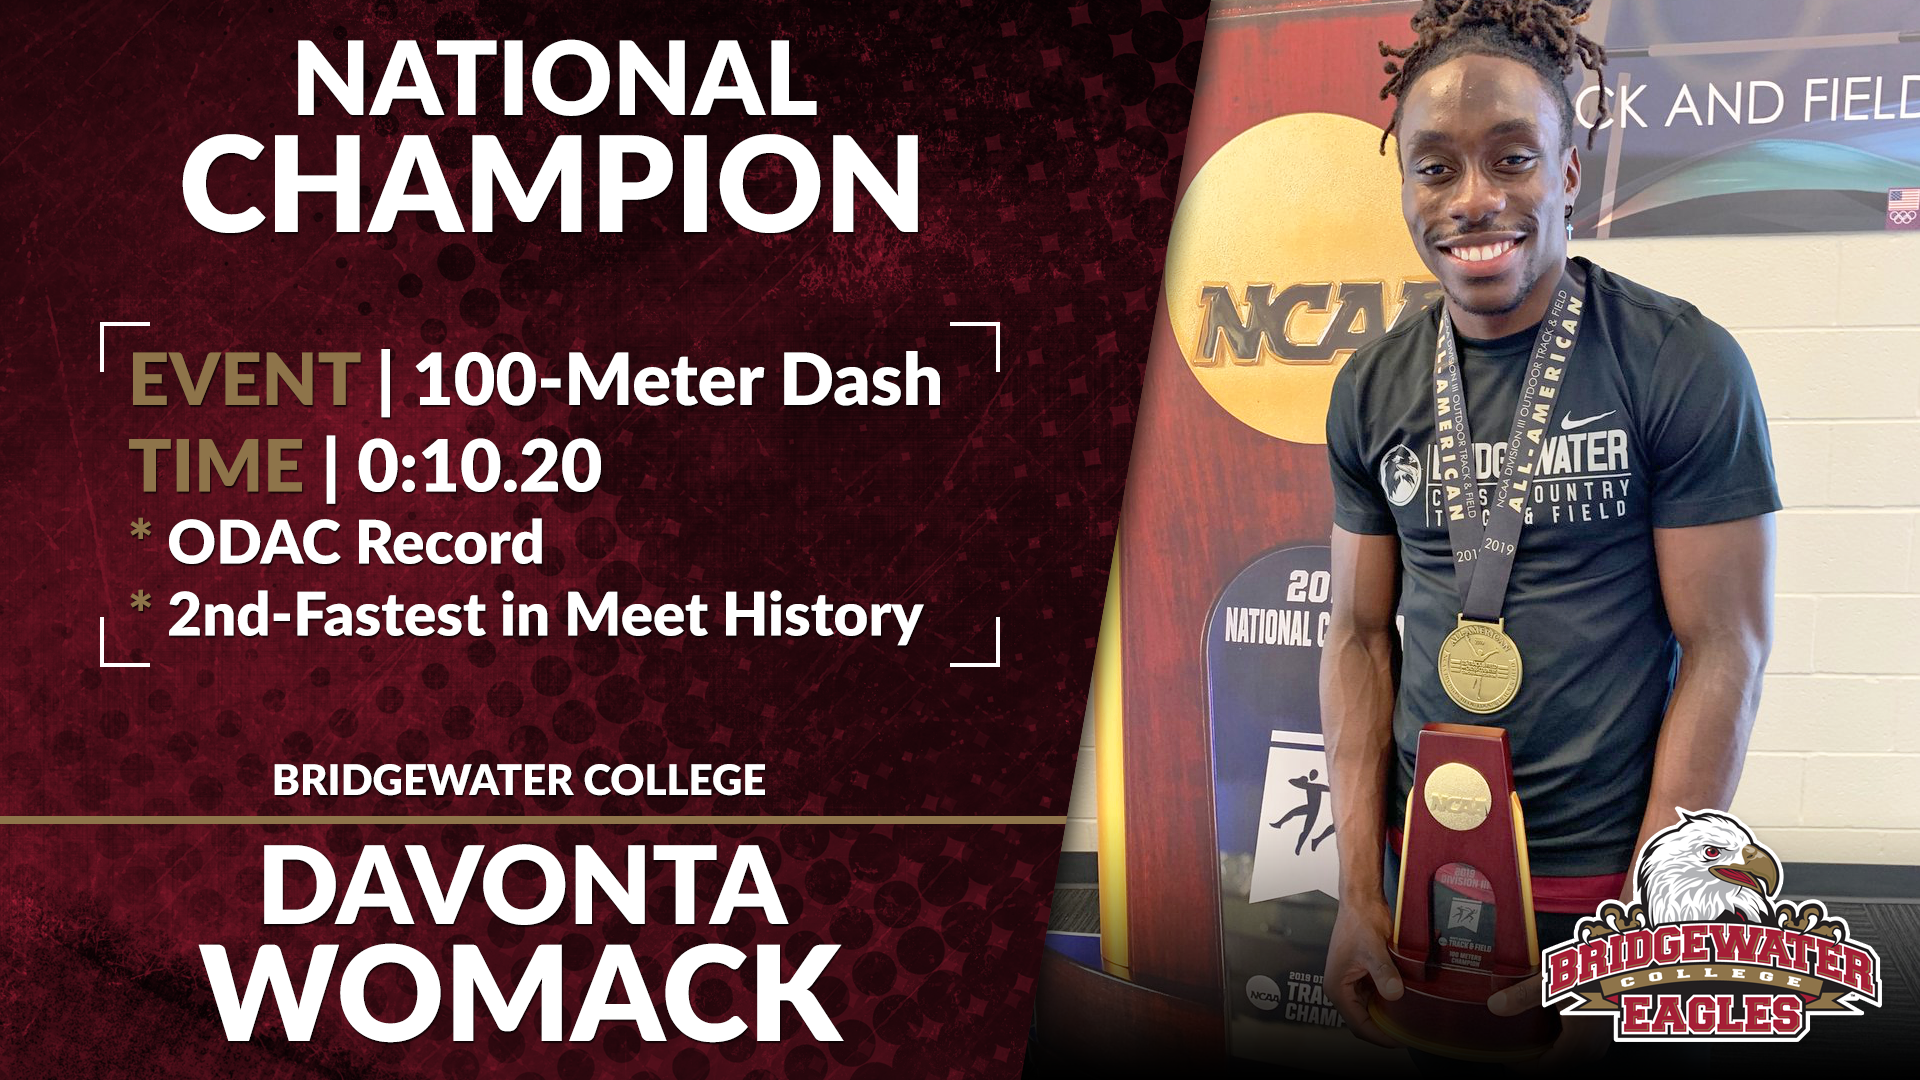 NATIONAL CHAMPION! Womack's Feat Headlines NCAA Track & Field Performances